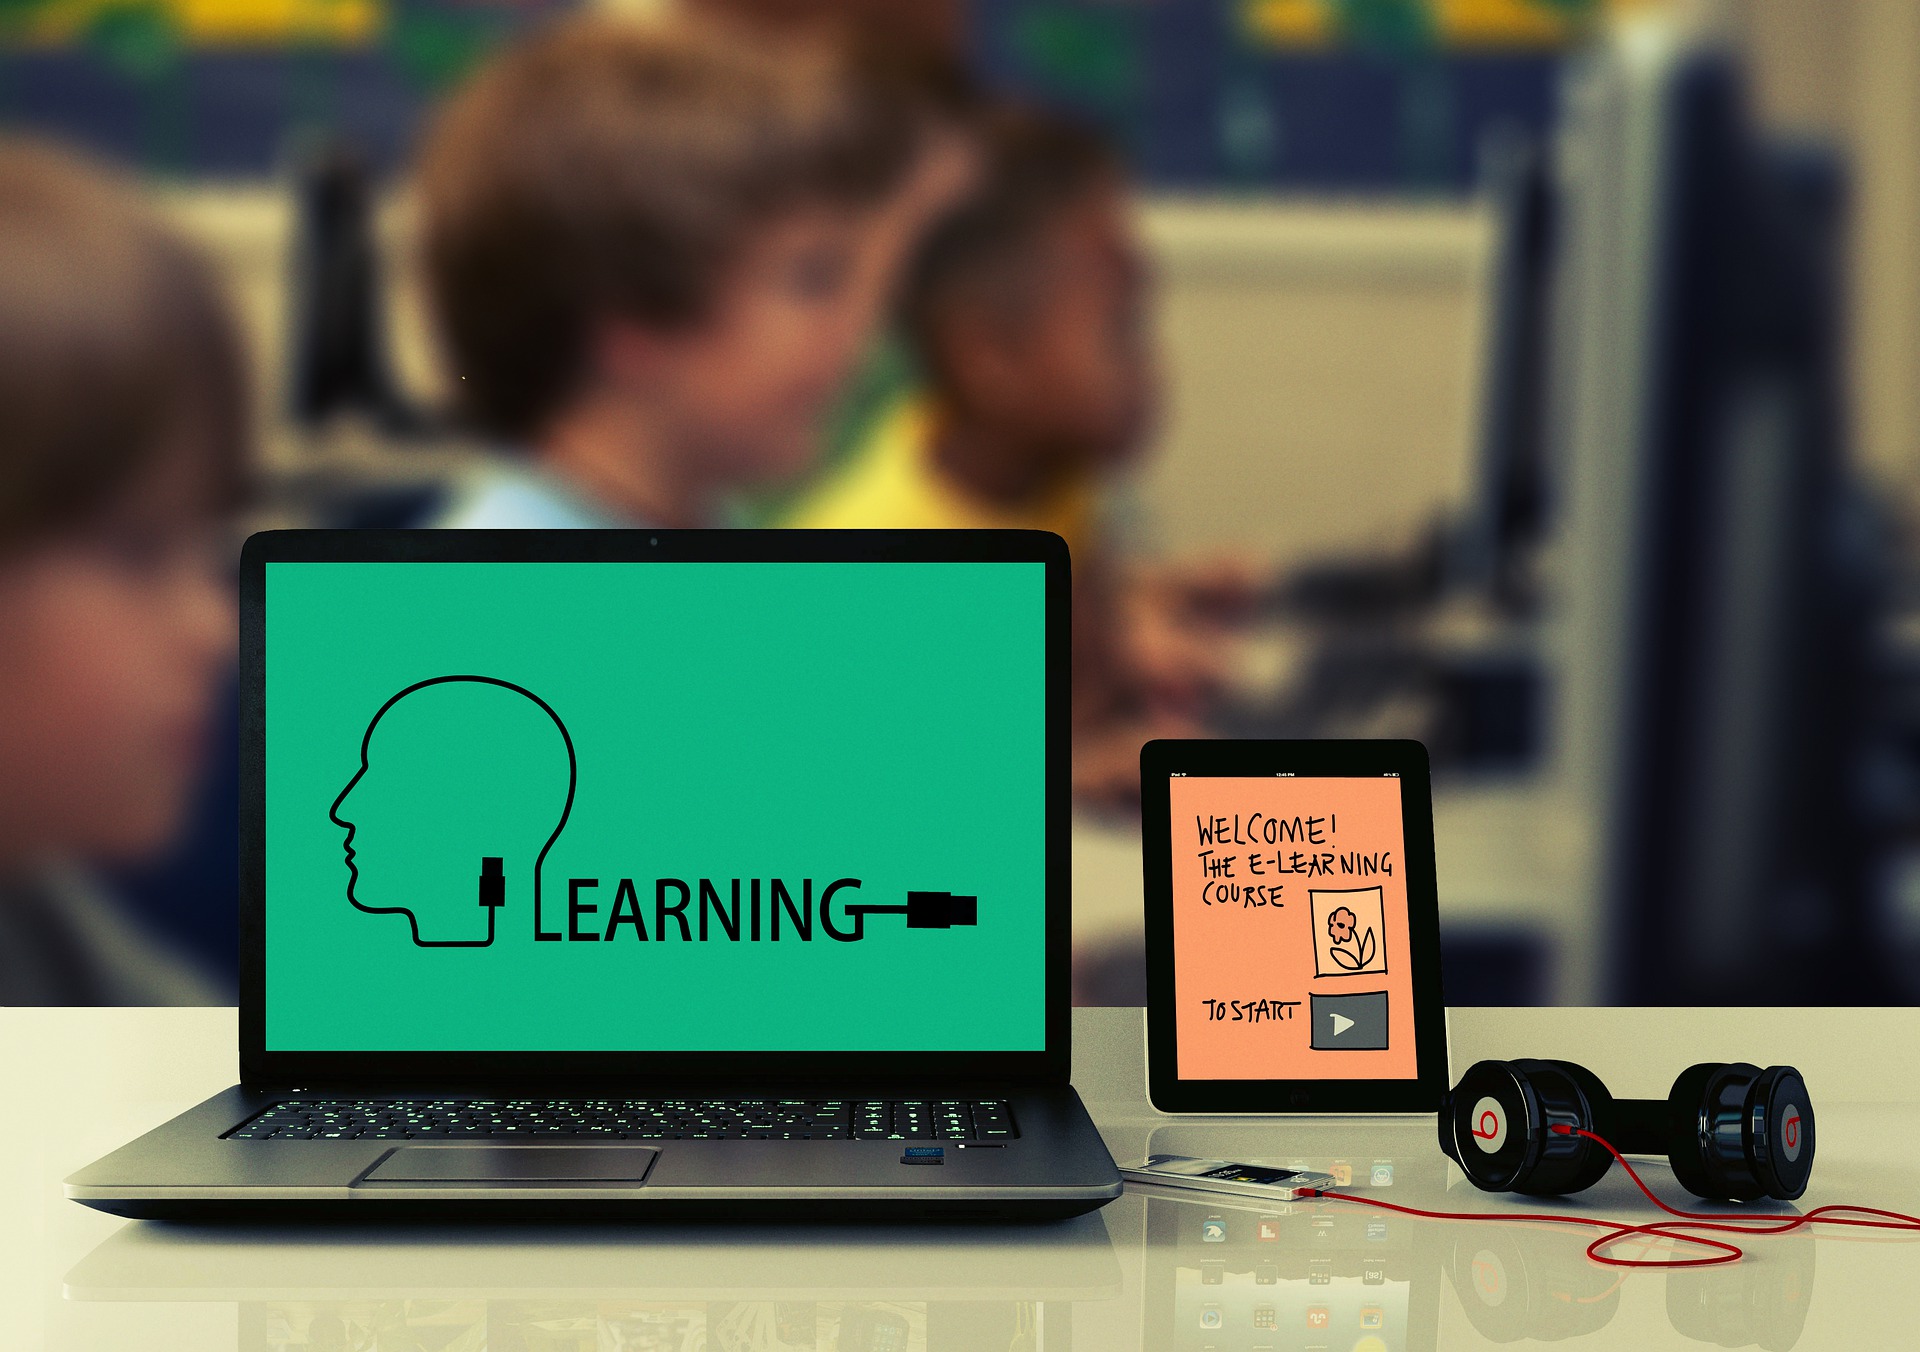 Photo showing a laptop that says "learning" on the screen with students out of focus in the background